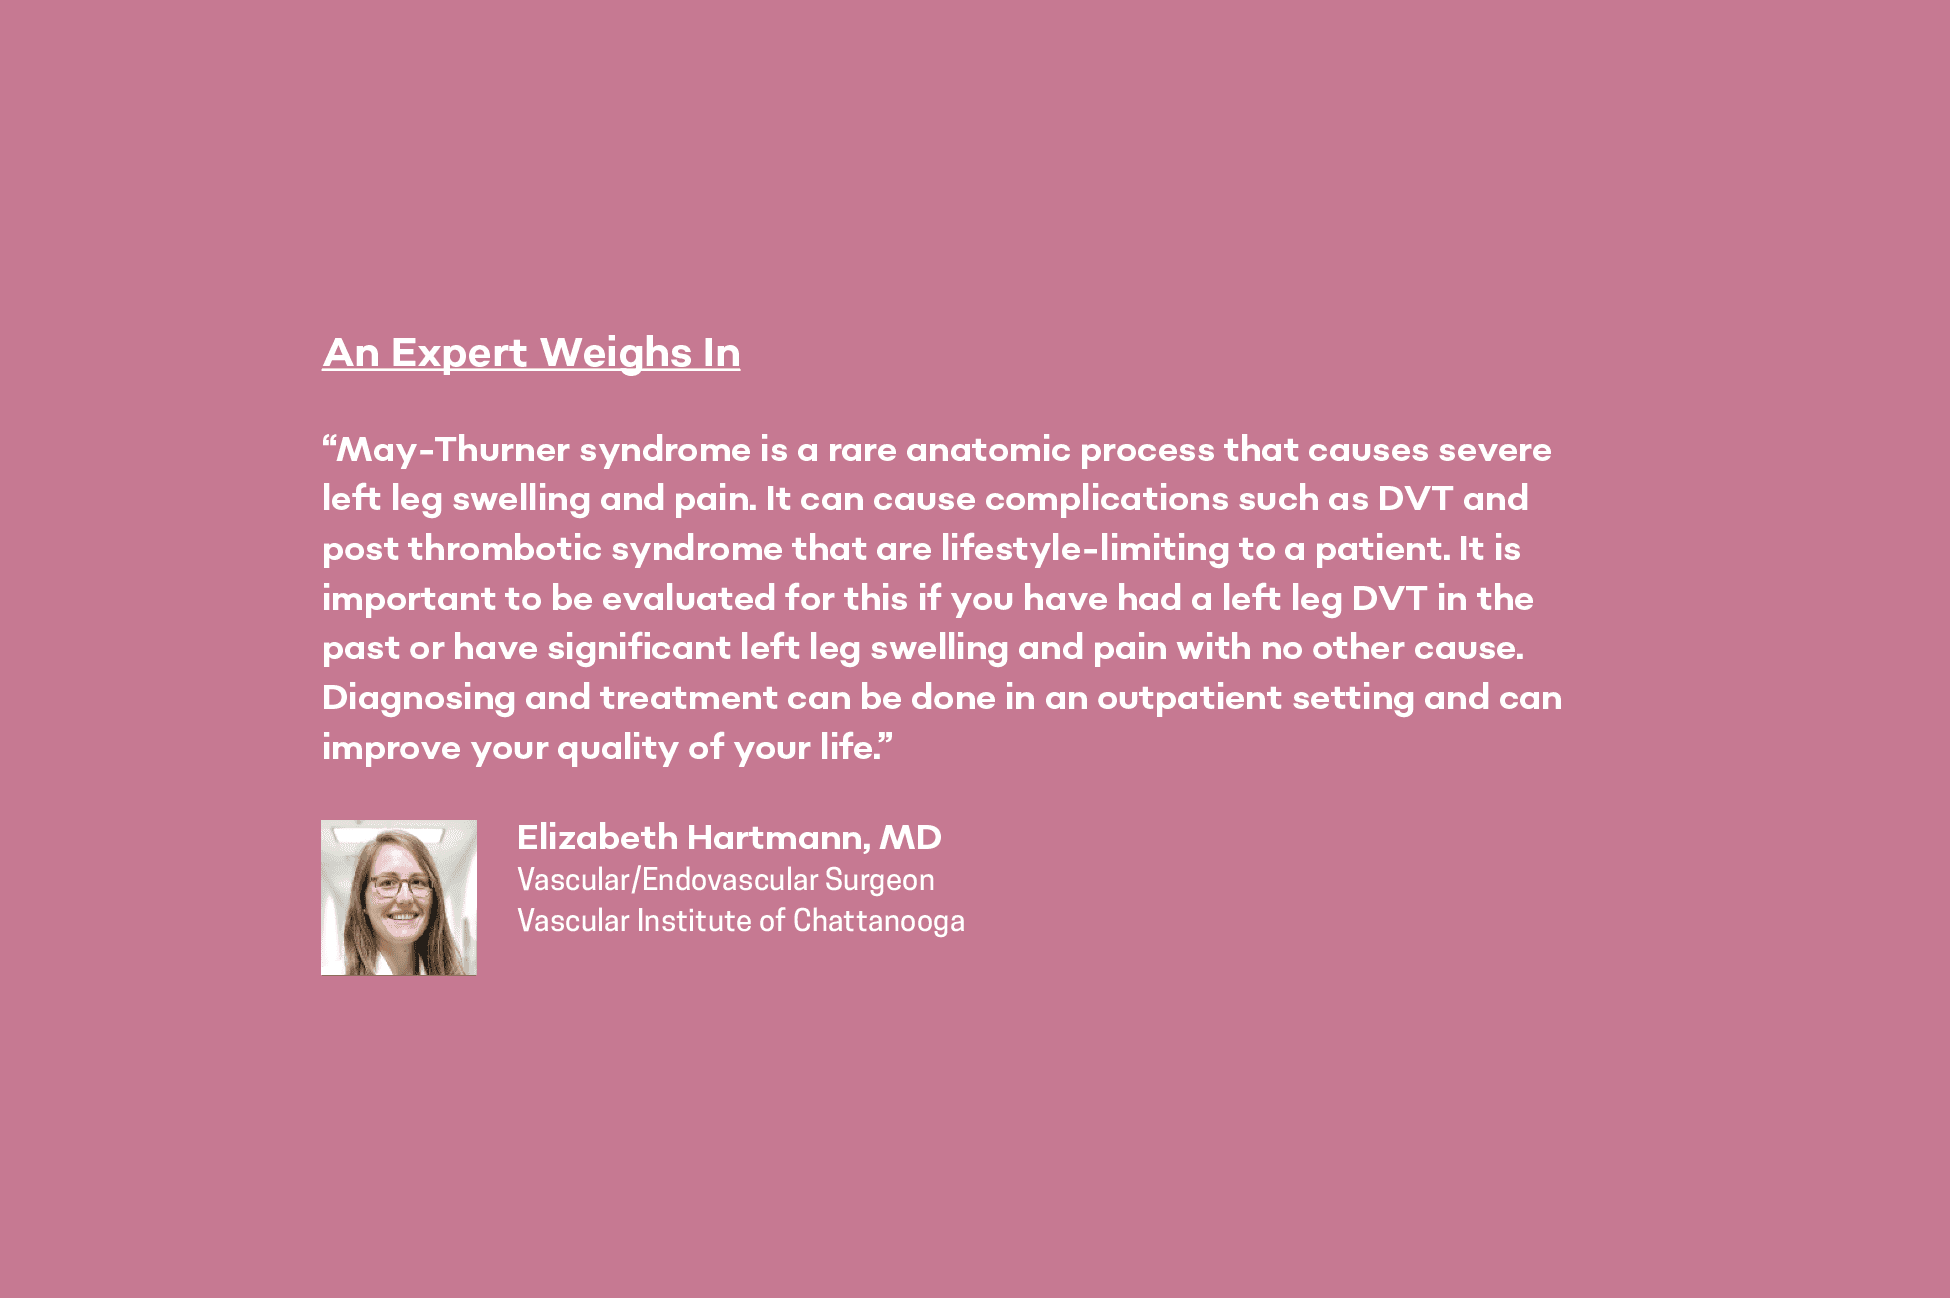 Dr. Elizabeth Hartmann, MD shares about May-Thurner Syndrome